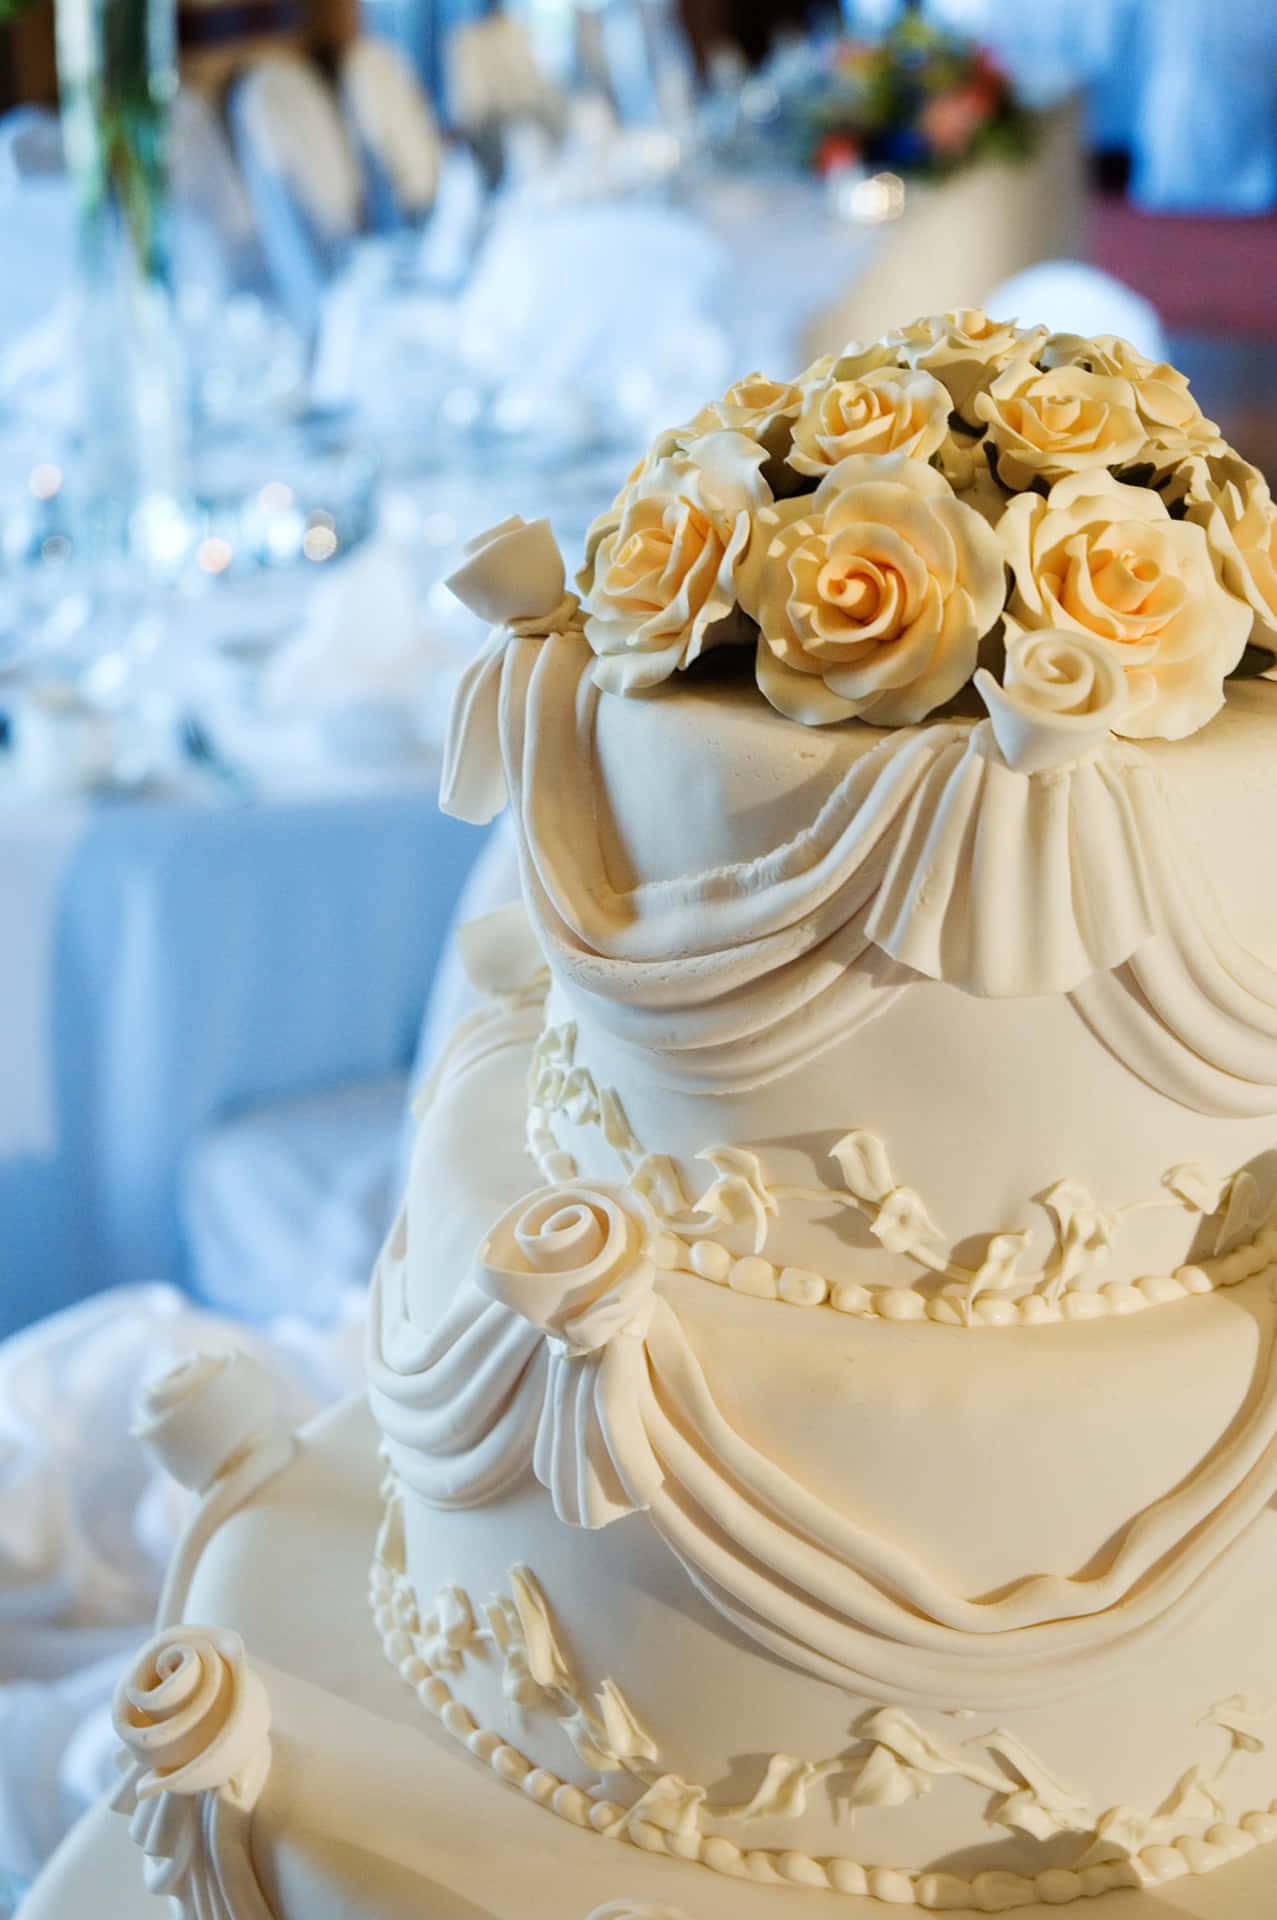 "A beautiful wedding cake topped with stunning flowers, perfect for any wedding!"